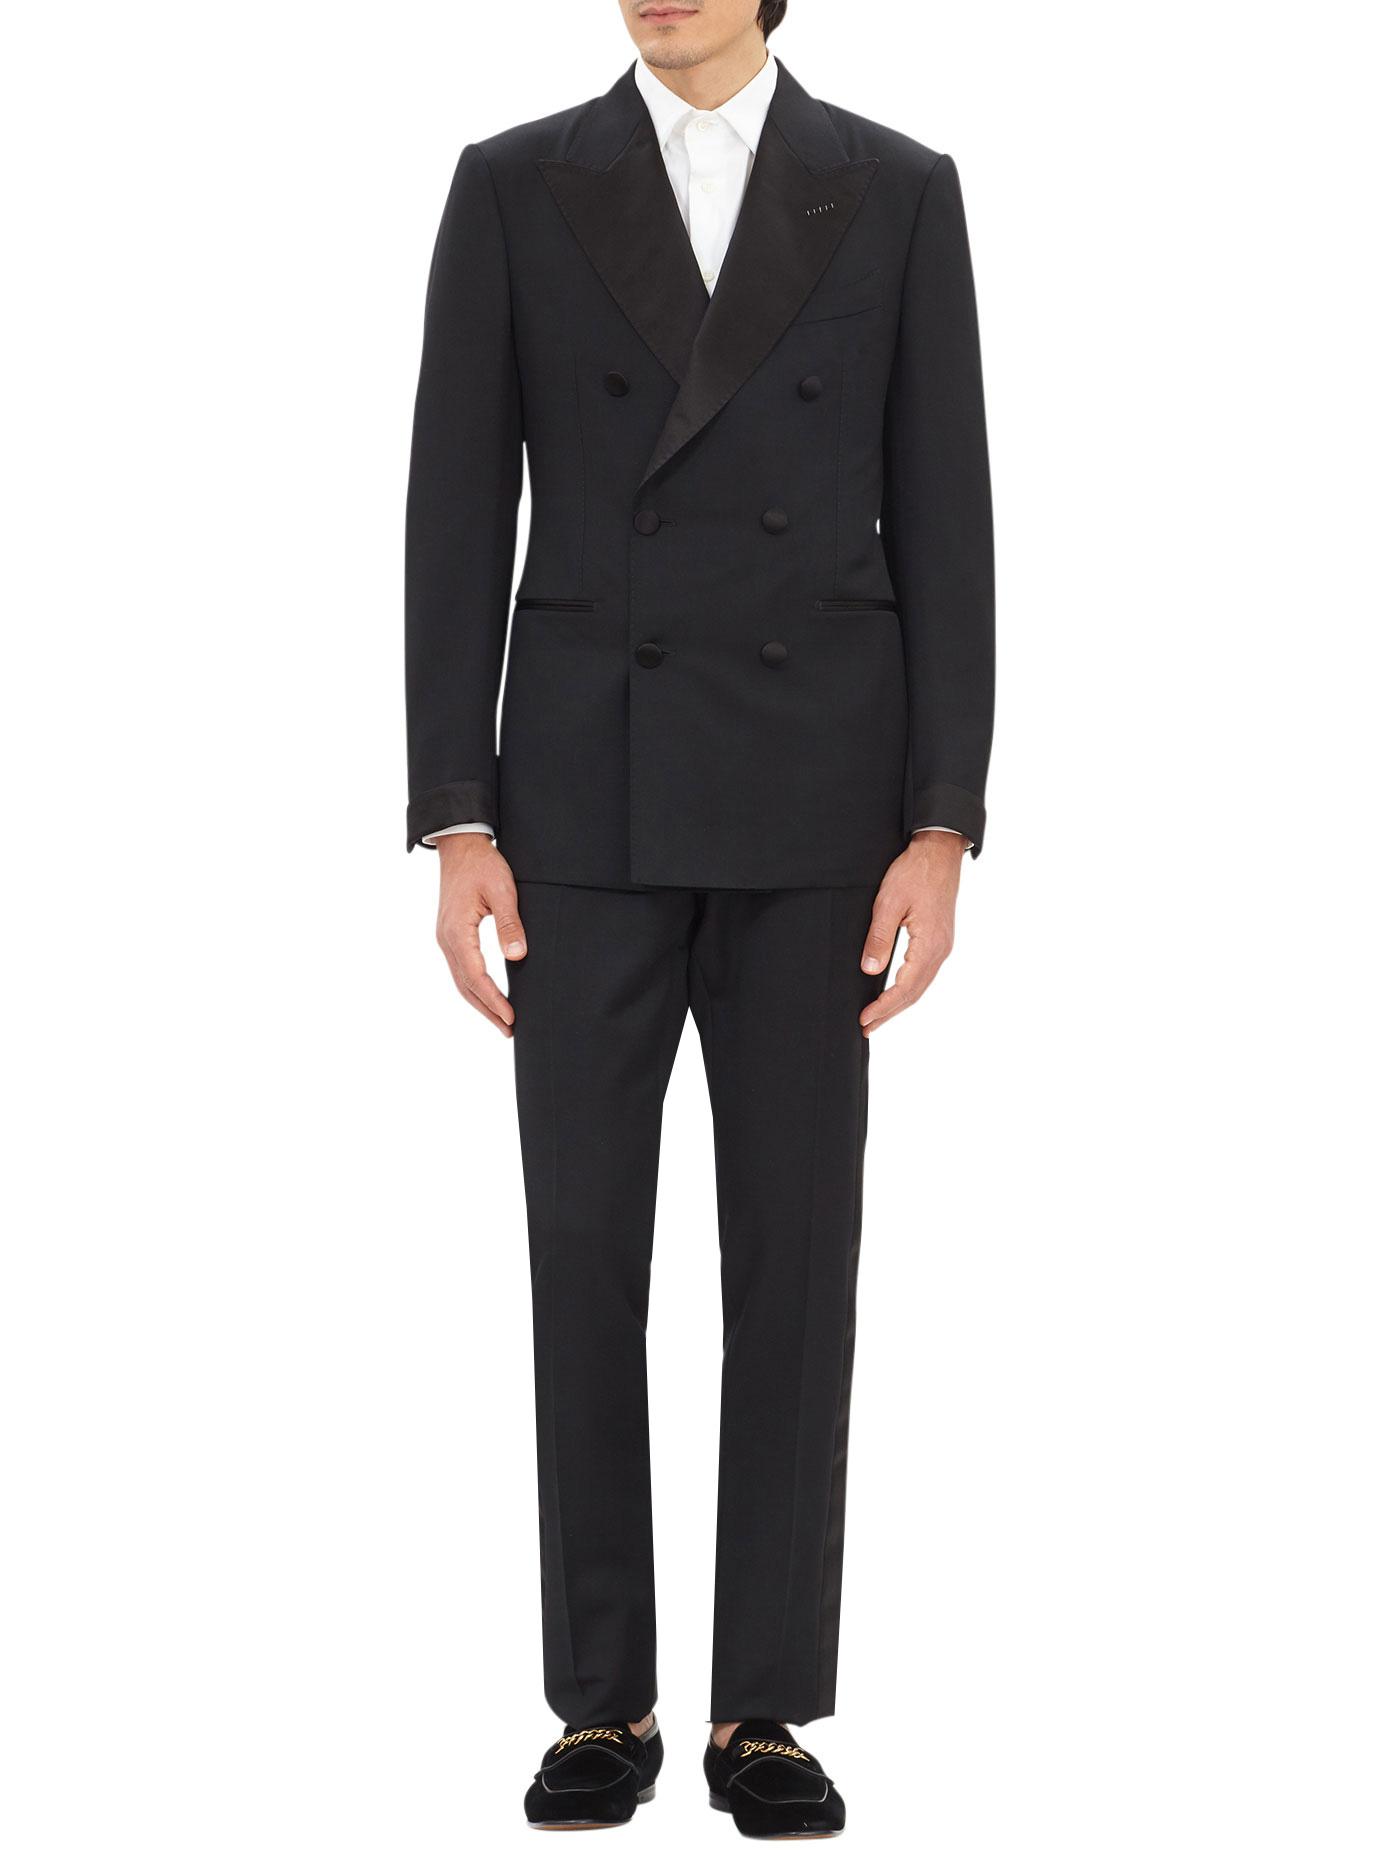 Tom Ford Double Breasted Wool And Mohair Tuxedo in Black for Men - Lyst